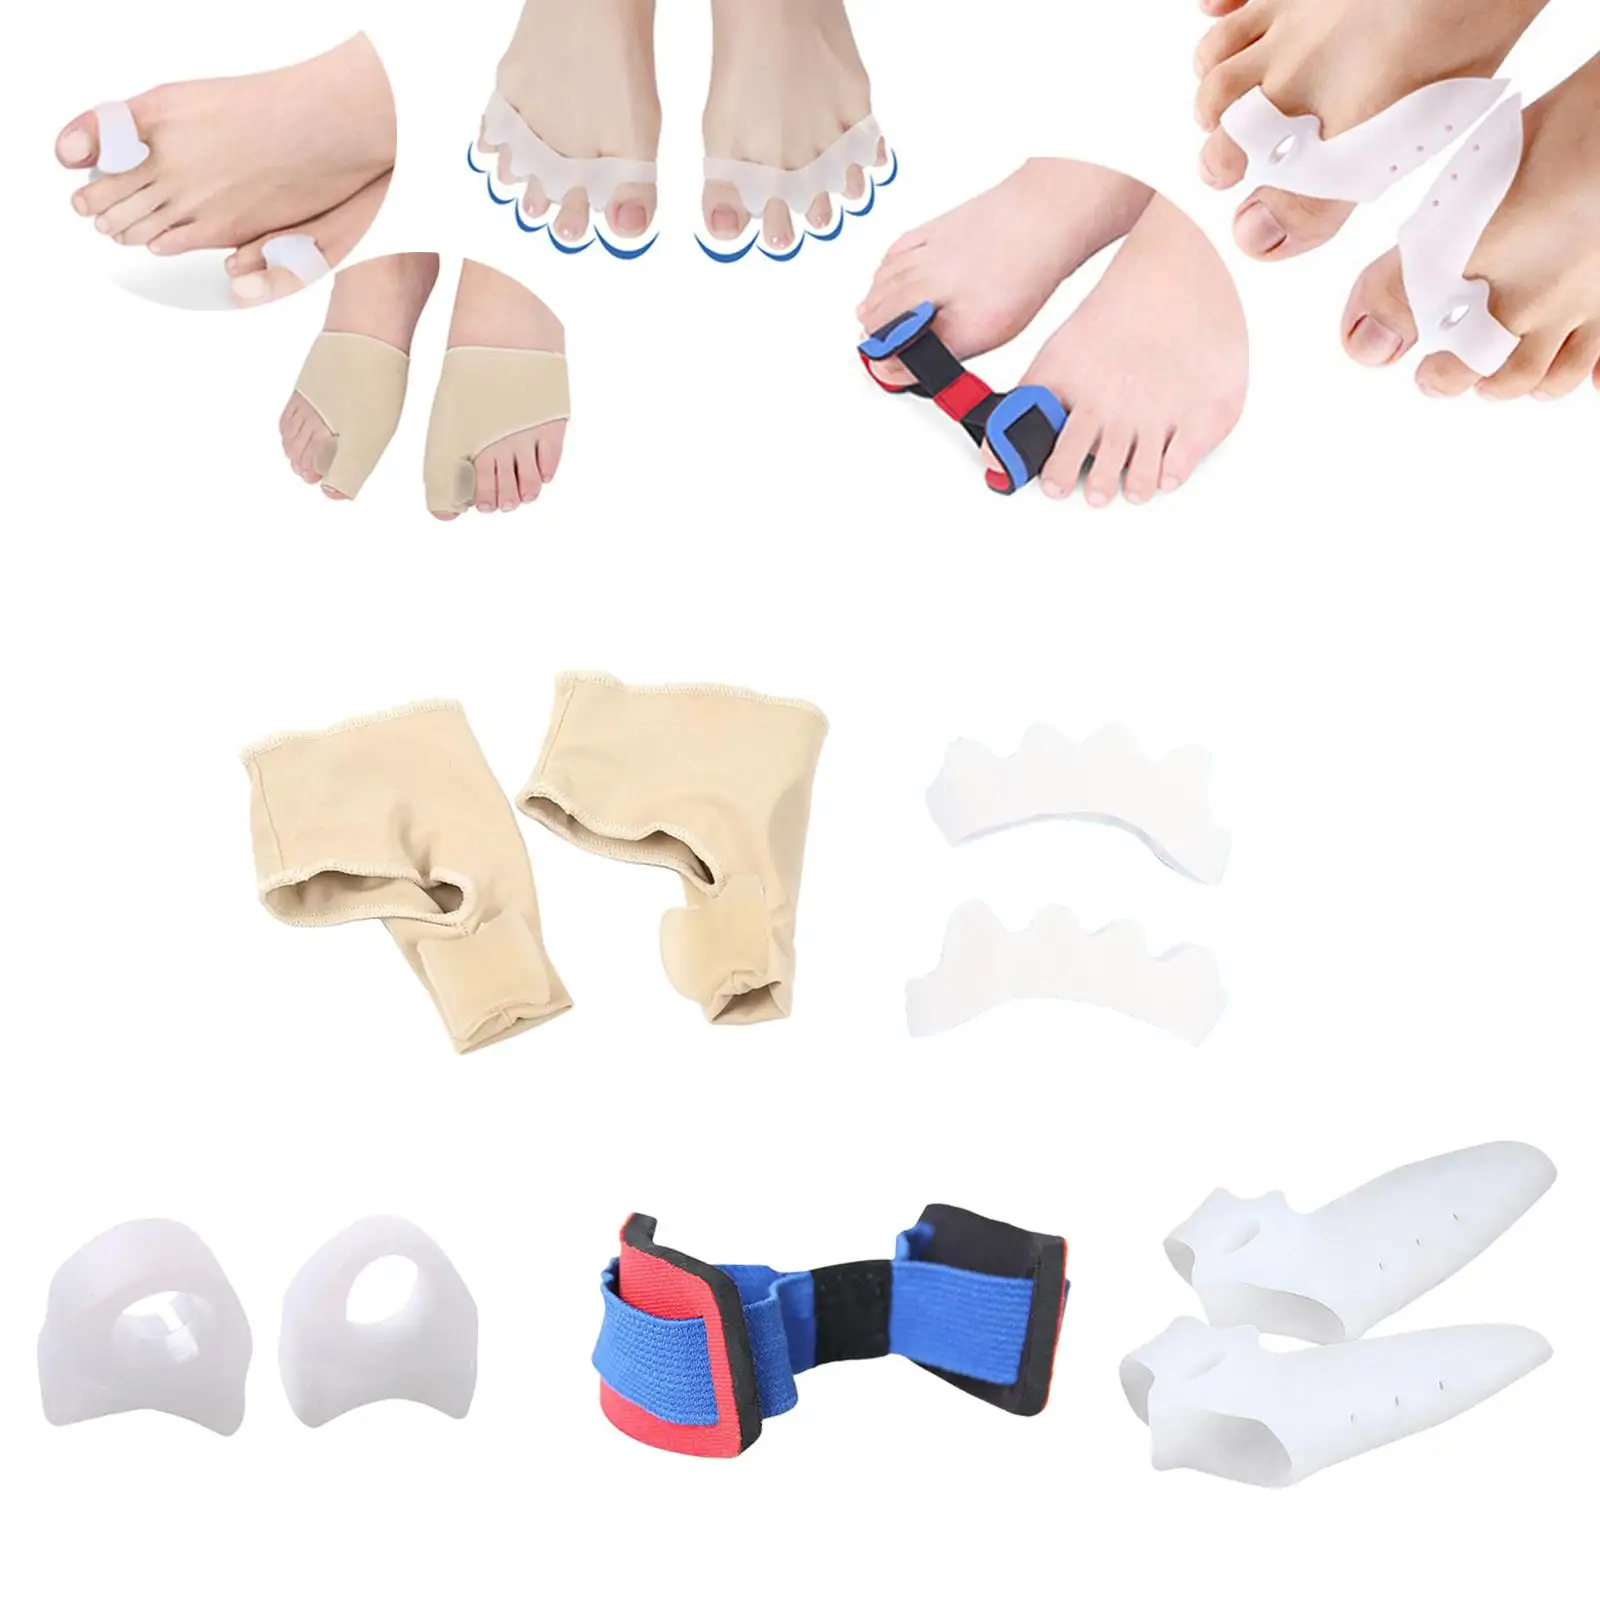 9 Pieces Bunion Corrector Bunion Relief Sleeves Kit, Toe Straightener Toe Spreader Quality Materials for Both Men and Women